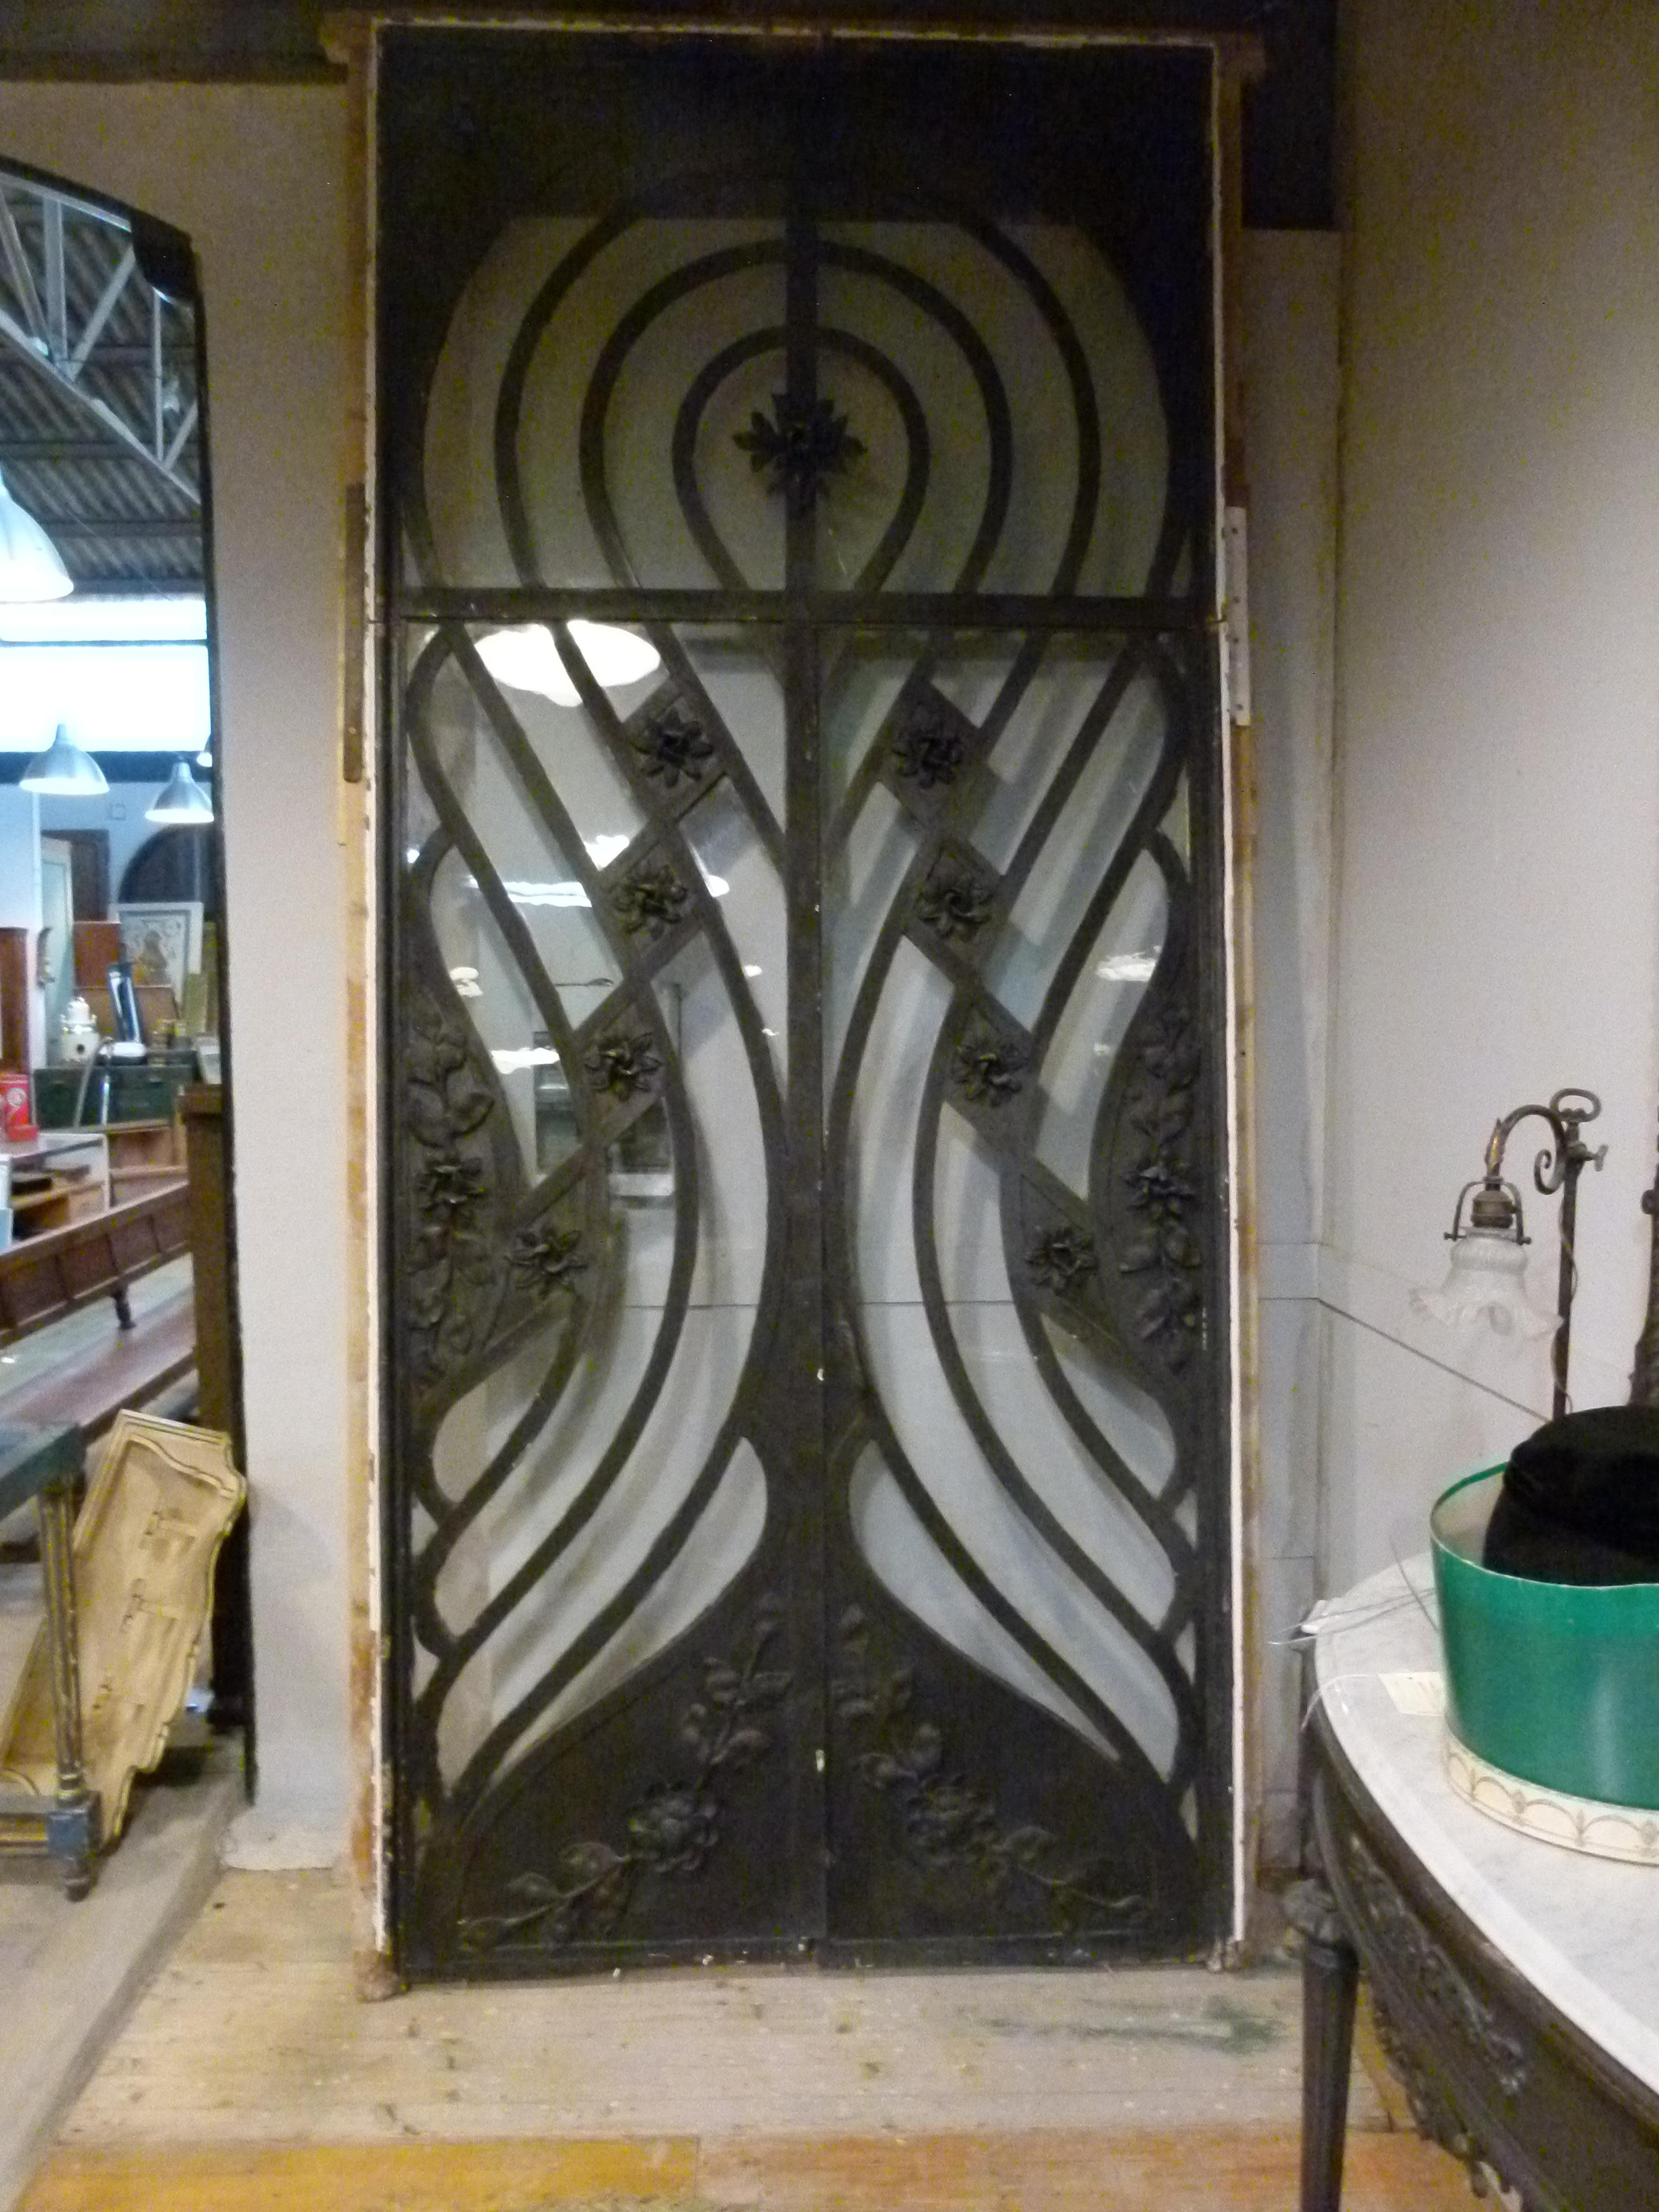 19th Century wrought iron double front door in Art Nouveau Style.
A large double door that belonged to the entrance of a noble house in Barcelona. It comprises floral decorations and symertical lines forms decorating the door in the way it was used